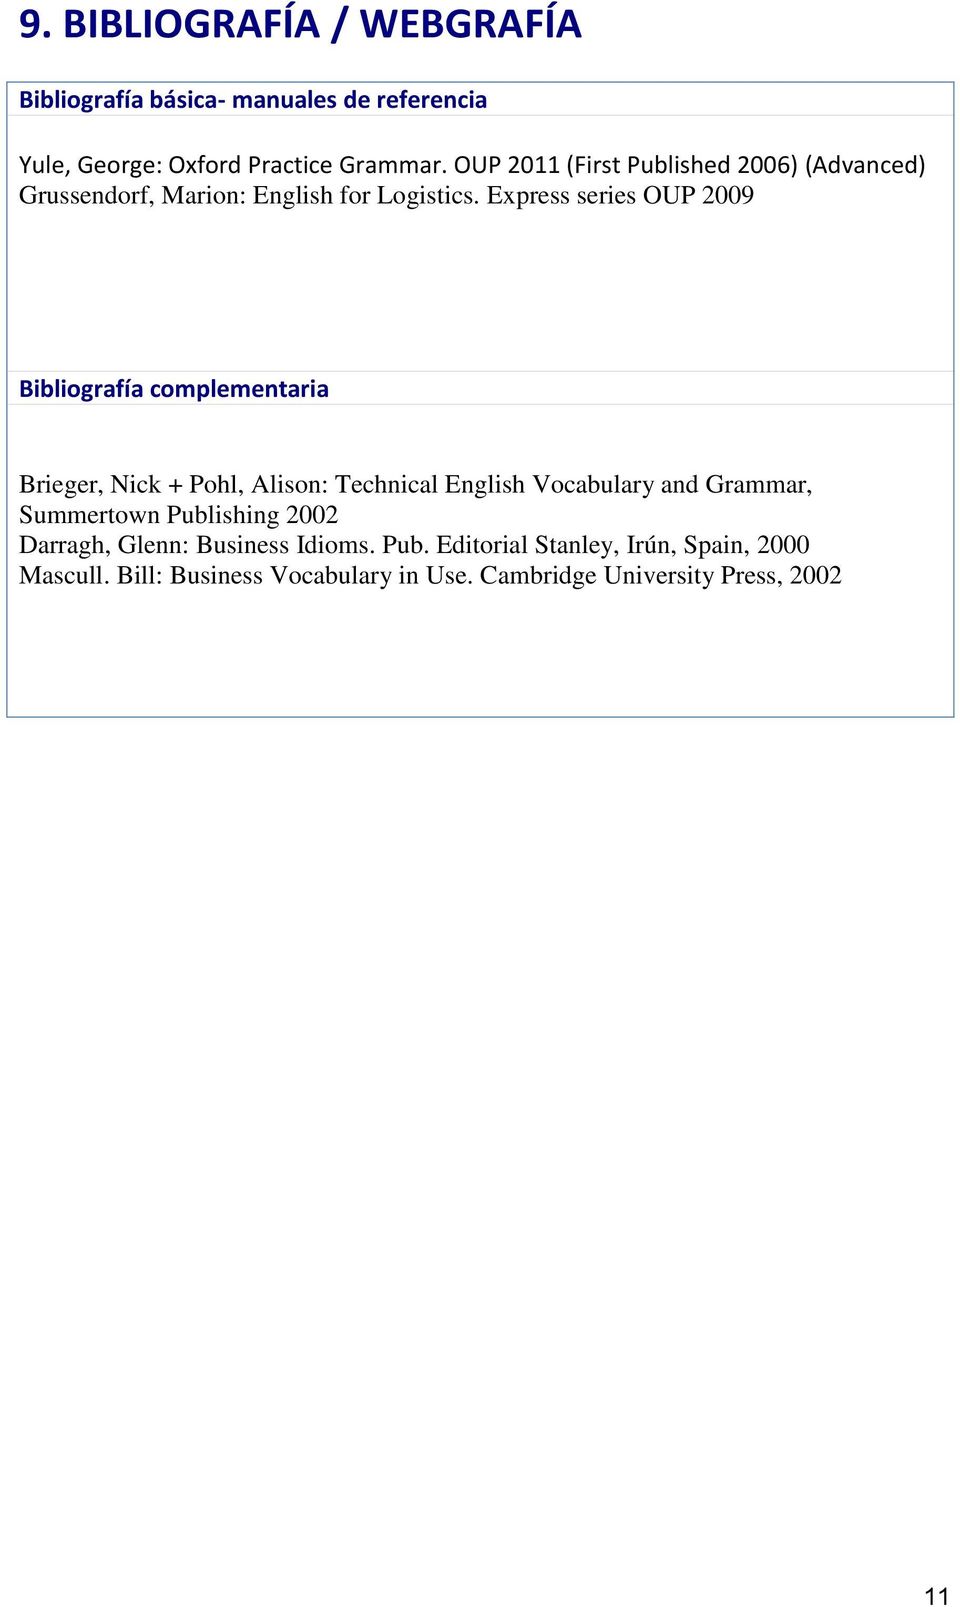 Express series OUP 2009 Bibliografía complementaria Brieger, Nick + Pohl, Alison: Technical English Vocabulary and Grammar,